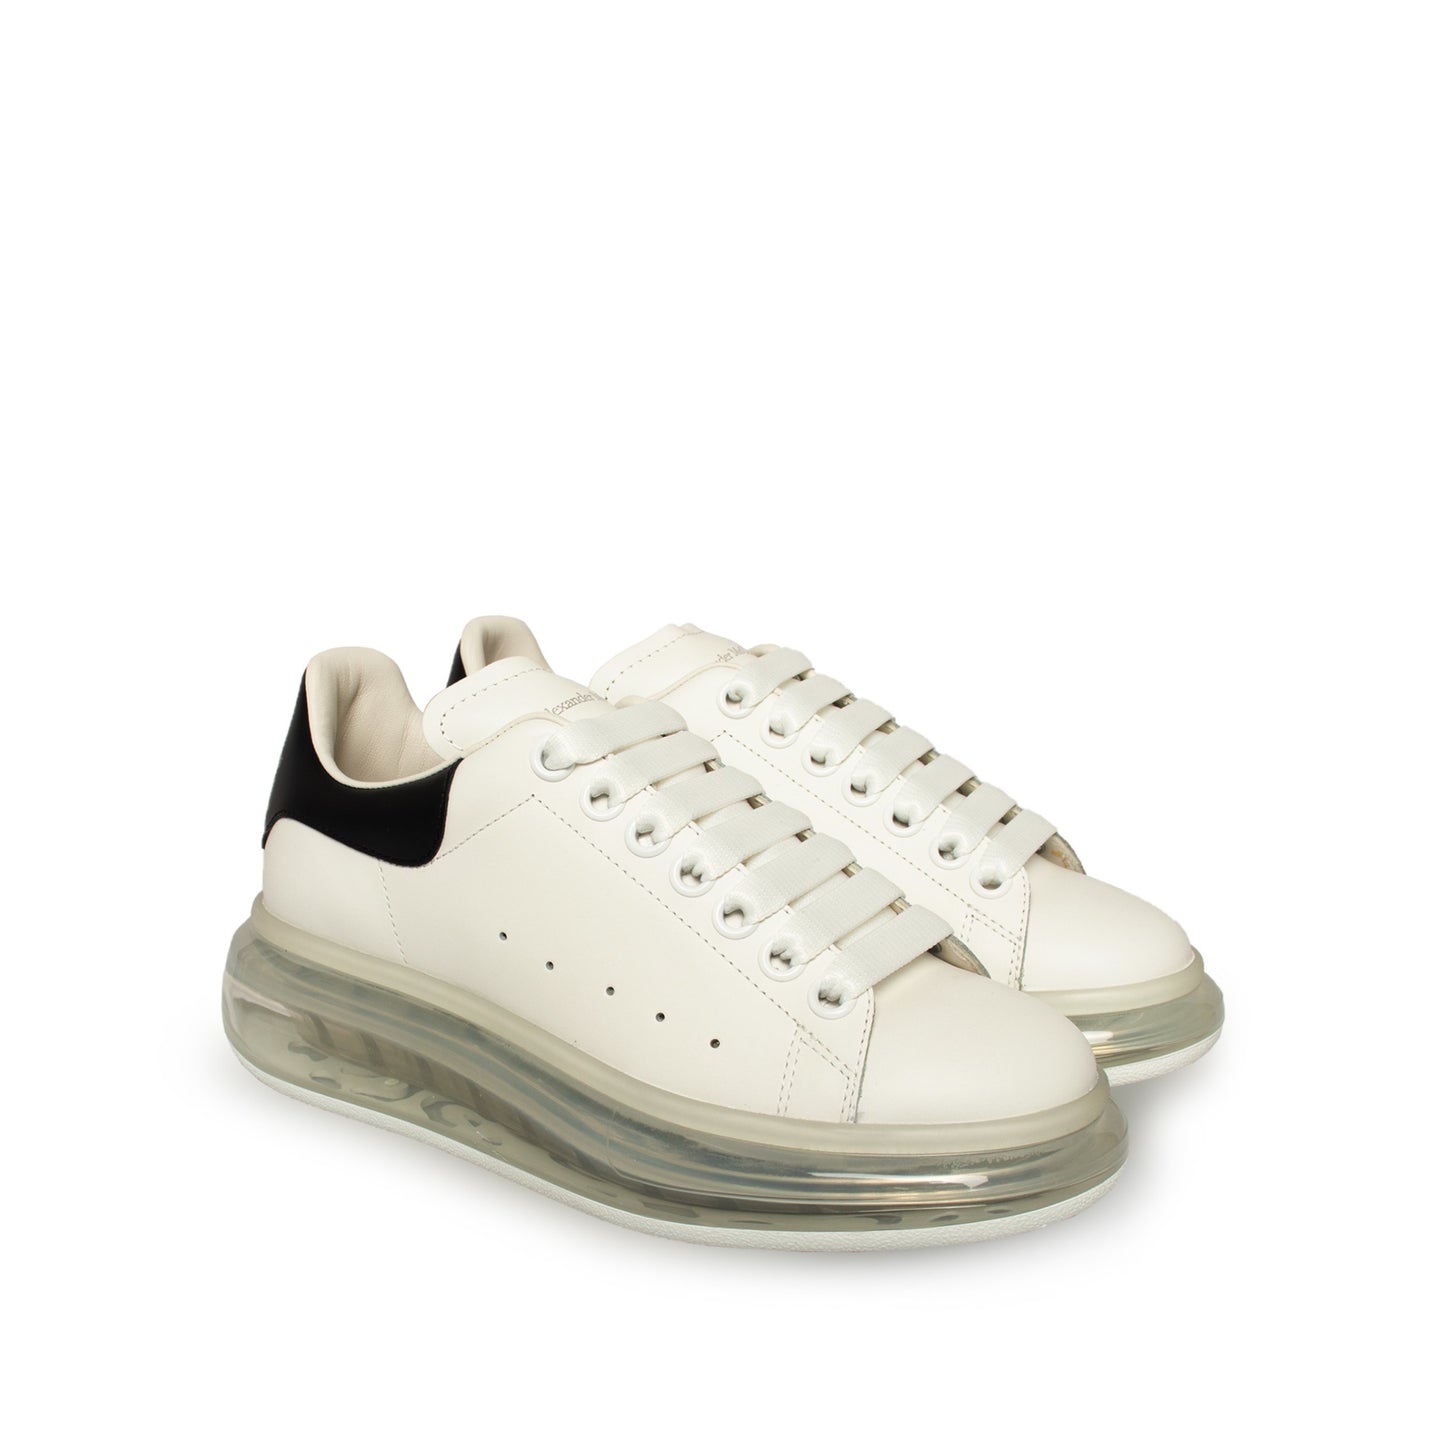 Larry Transparent Sole Sneakers in White/Black